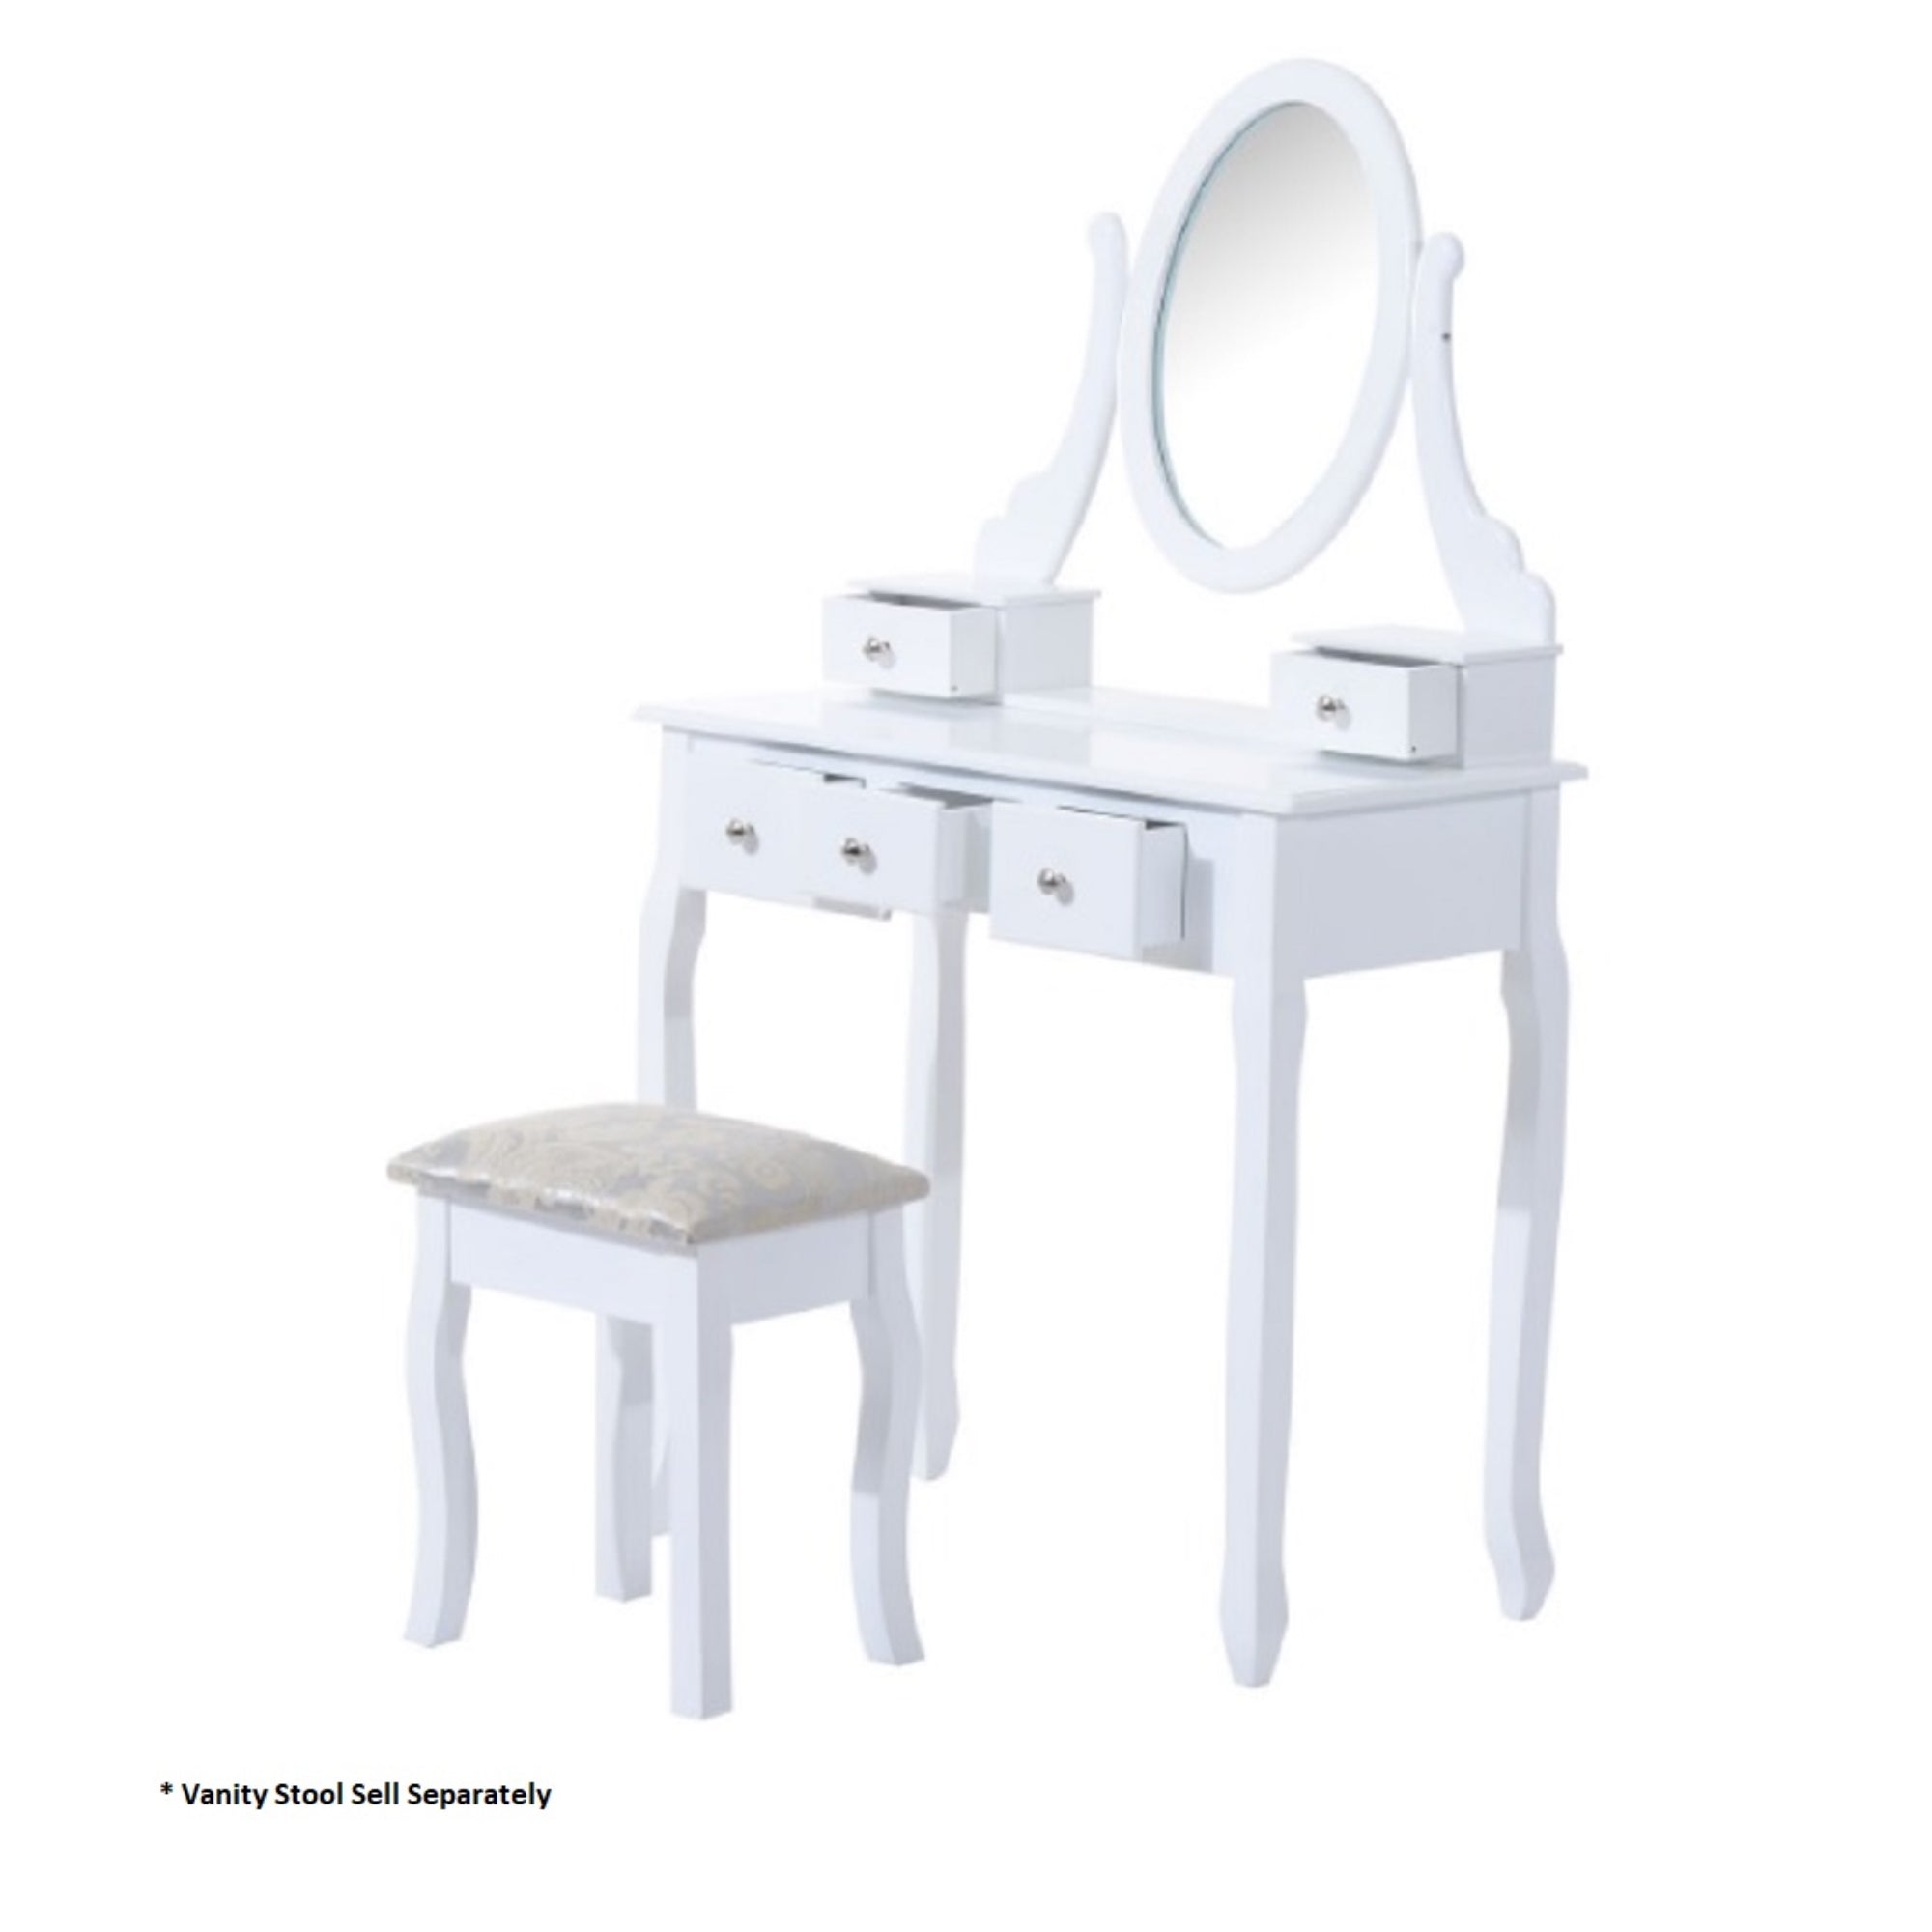 ViscoLogic IVORY Wooden Mirrored Makeup Vanity Table (White)